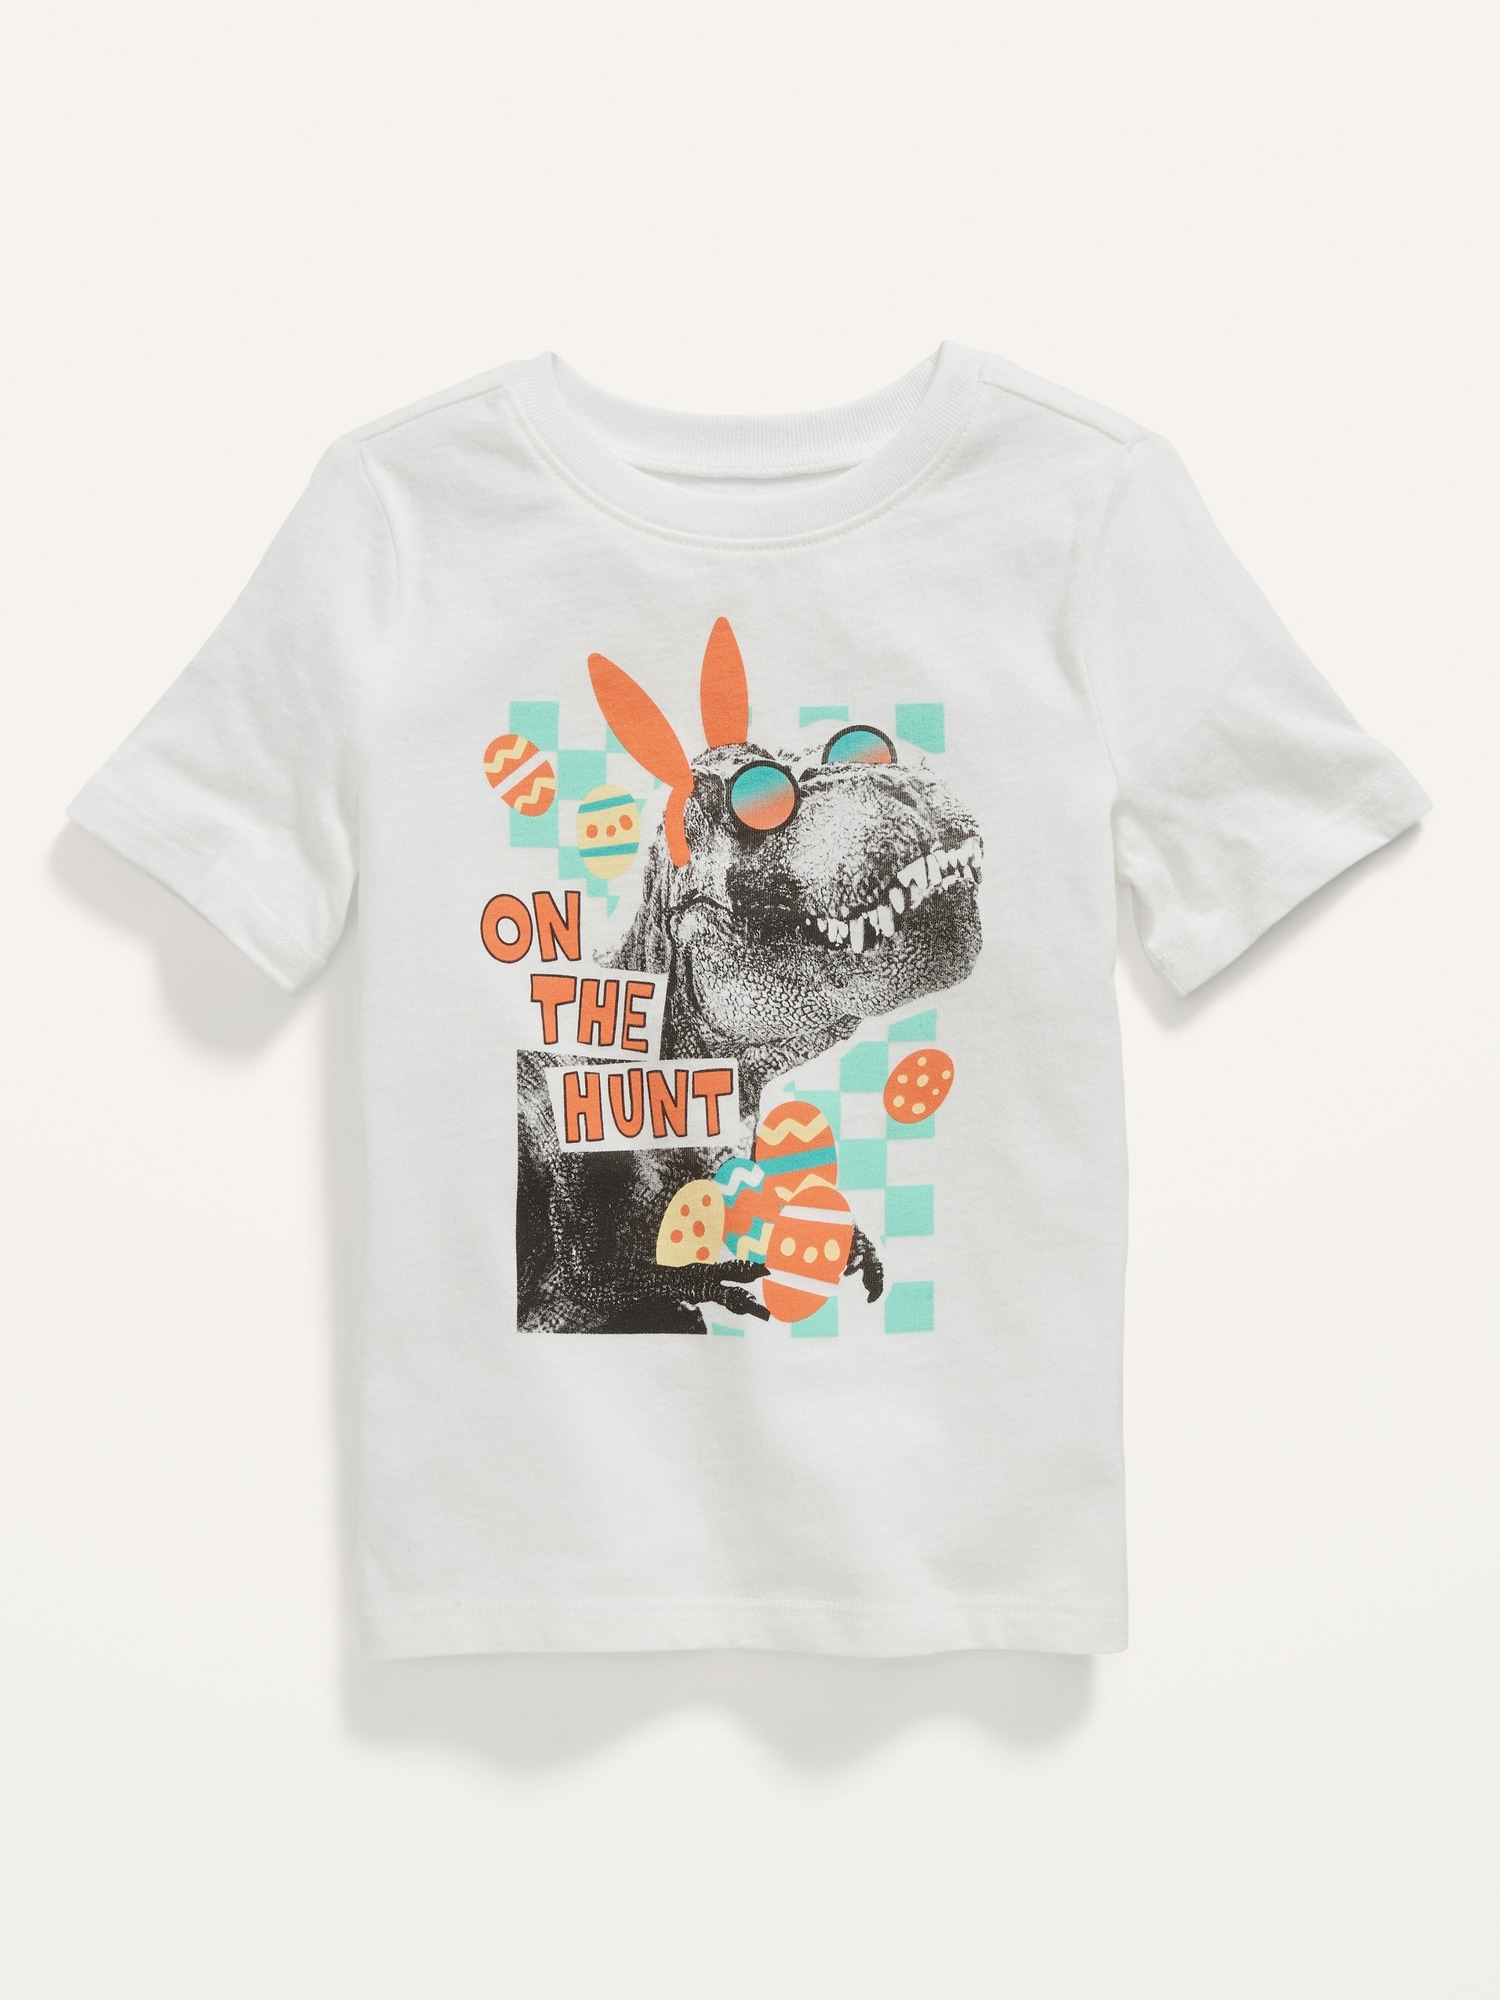 Unisex Crew-Neck Graphic T-Shirt for Toddler | Old Navy